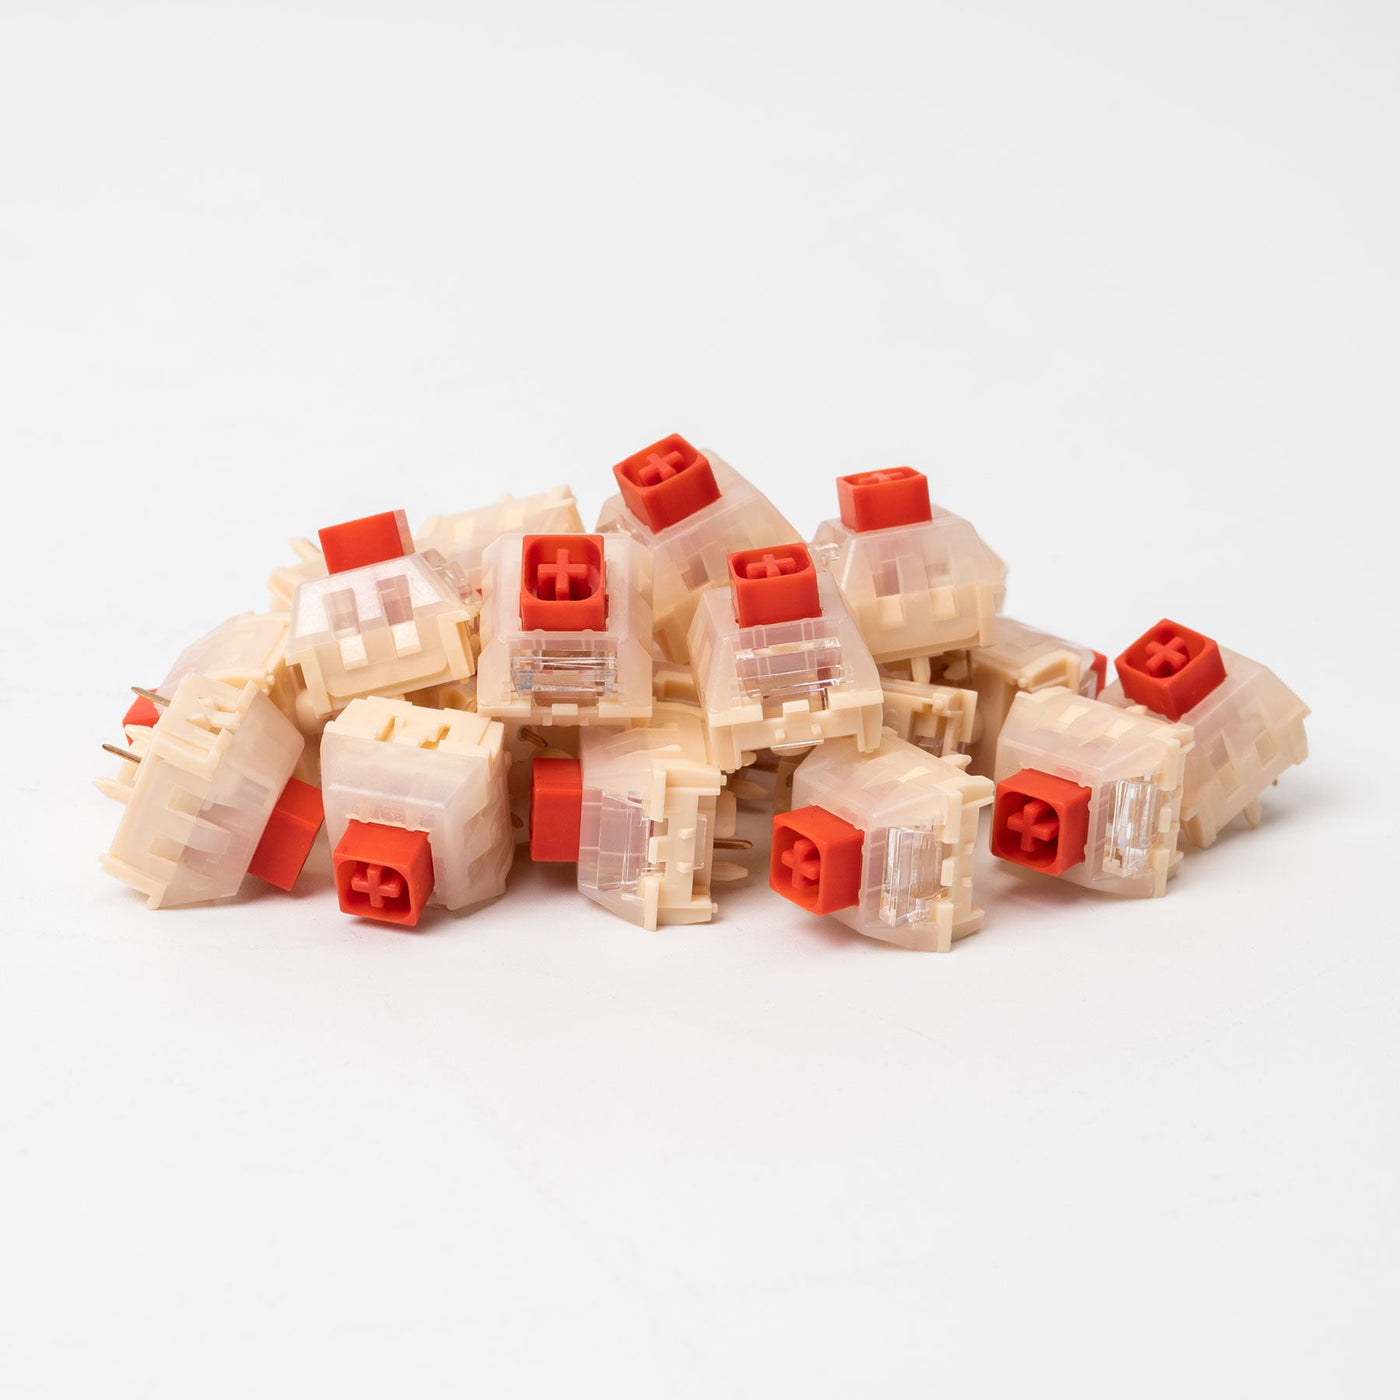 Kailh Red Bean Pudding Box Switches